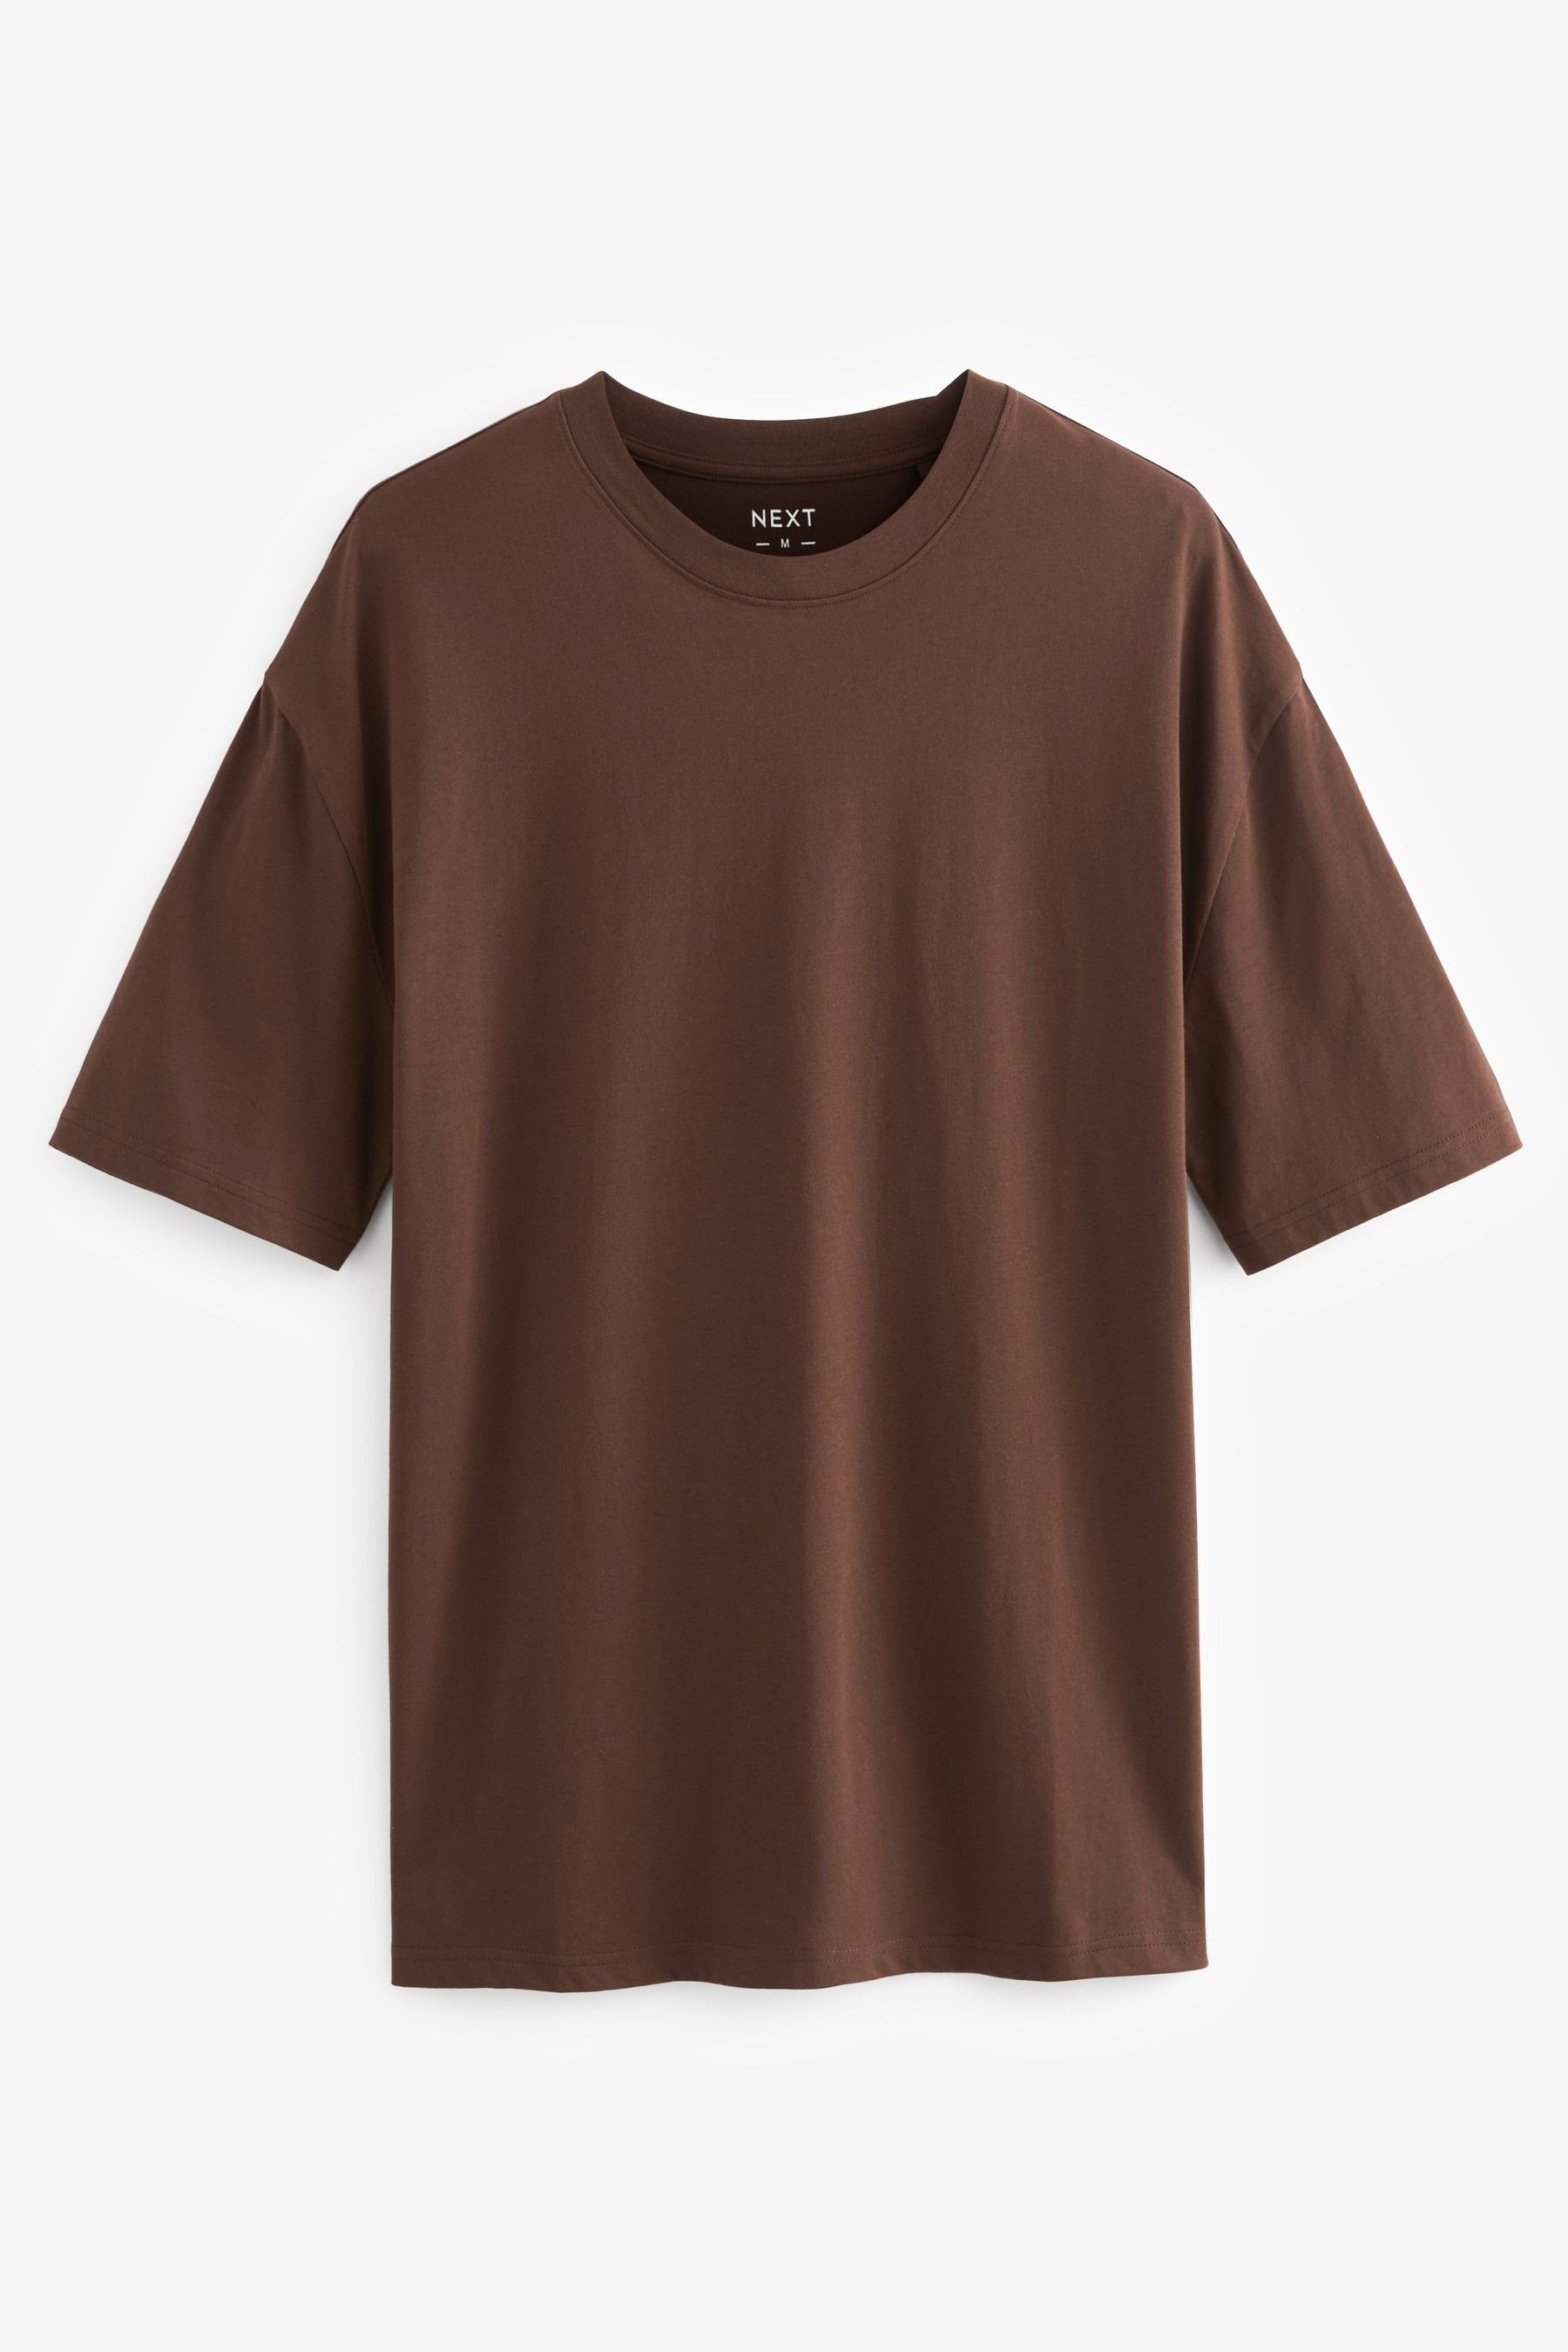 Next T-Shirt Rundhals-T-Shirt im Chocolate Fit Brown (1-tlg) Relaxed